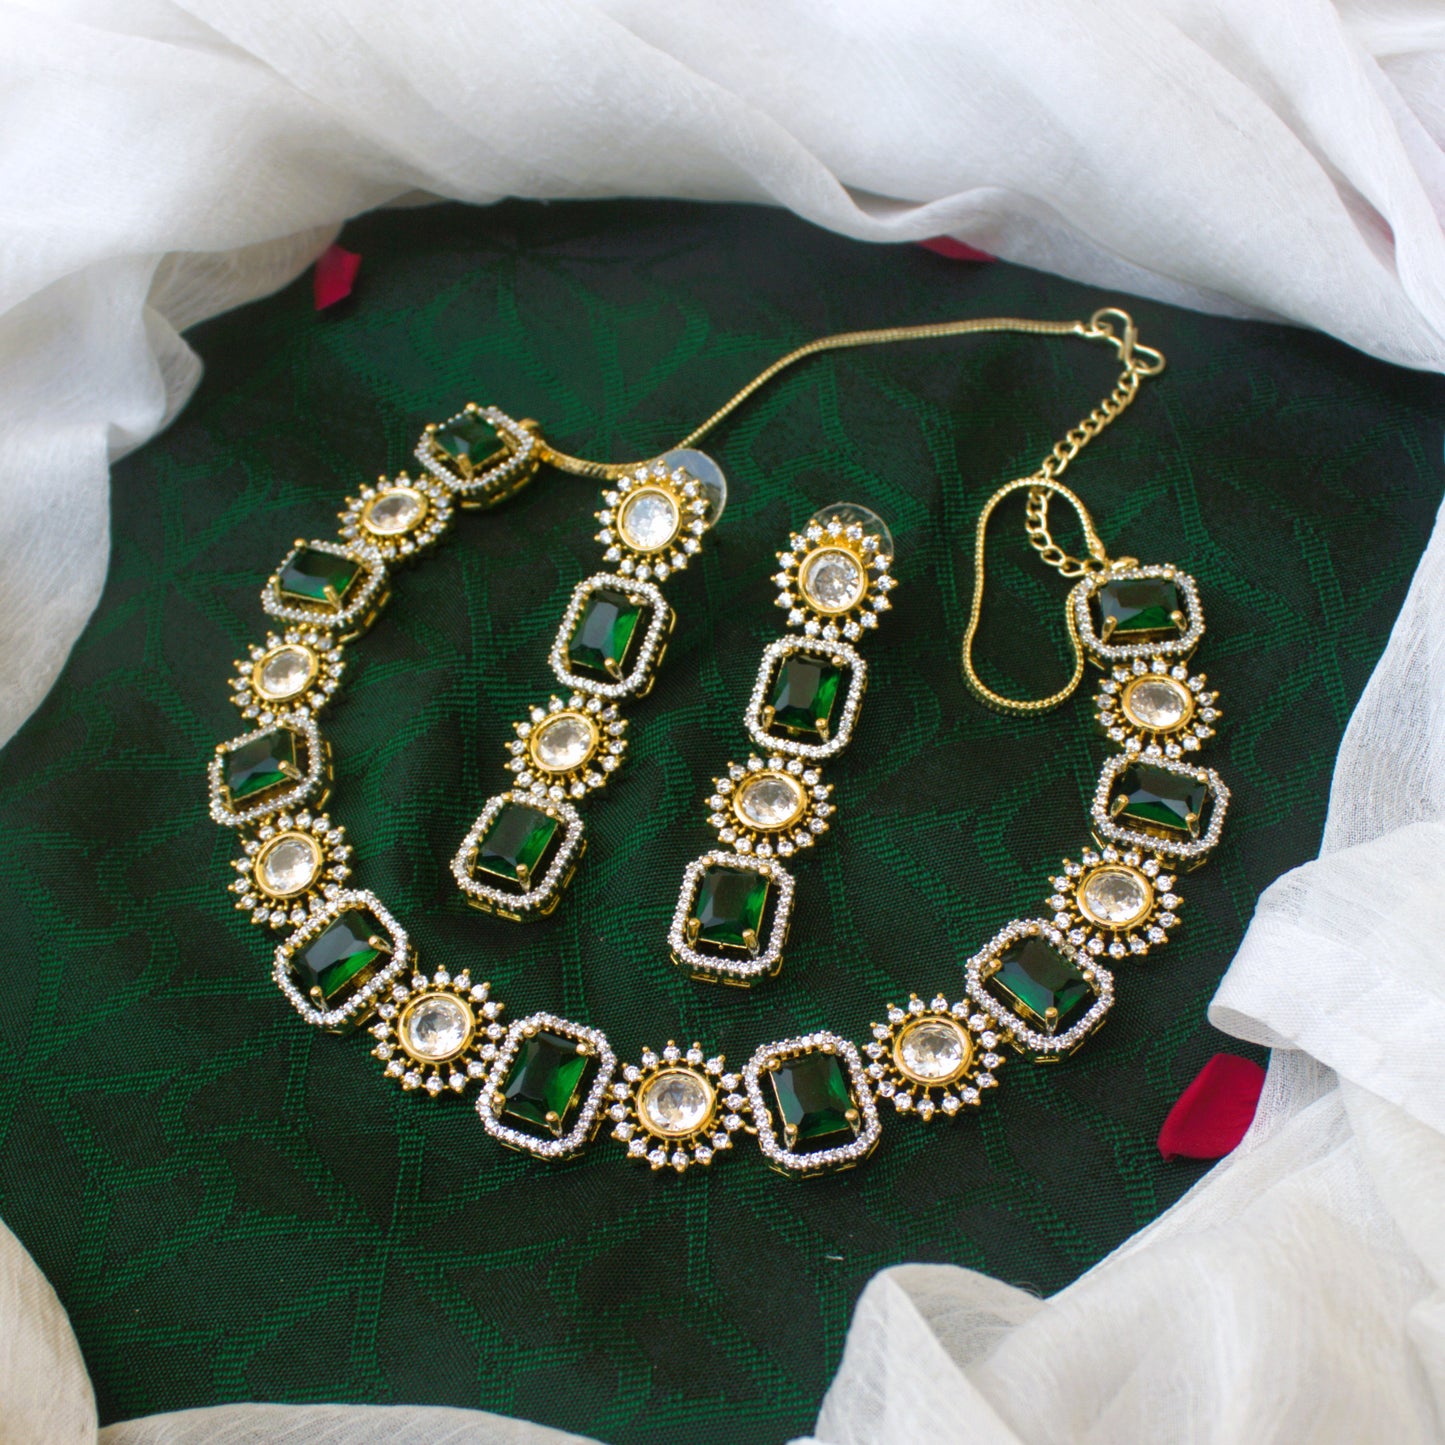 Diamond Look Rectangle Emerald AD Bridal Necklace Set in Micro Gold Polish - Statement Bridal Jewellery Collection